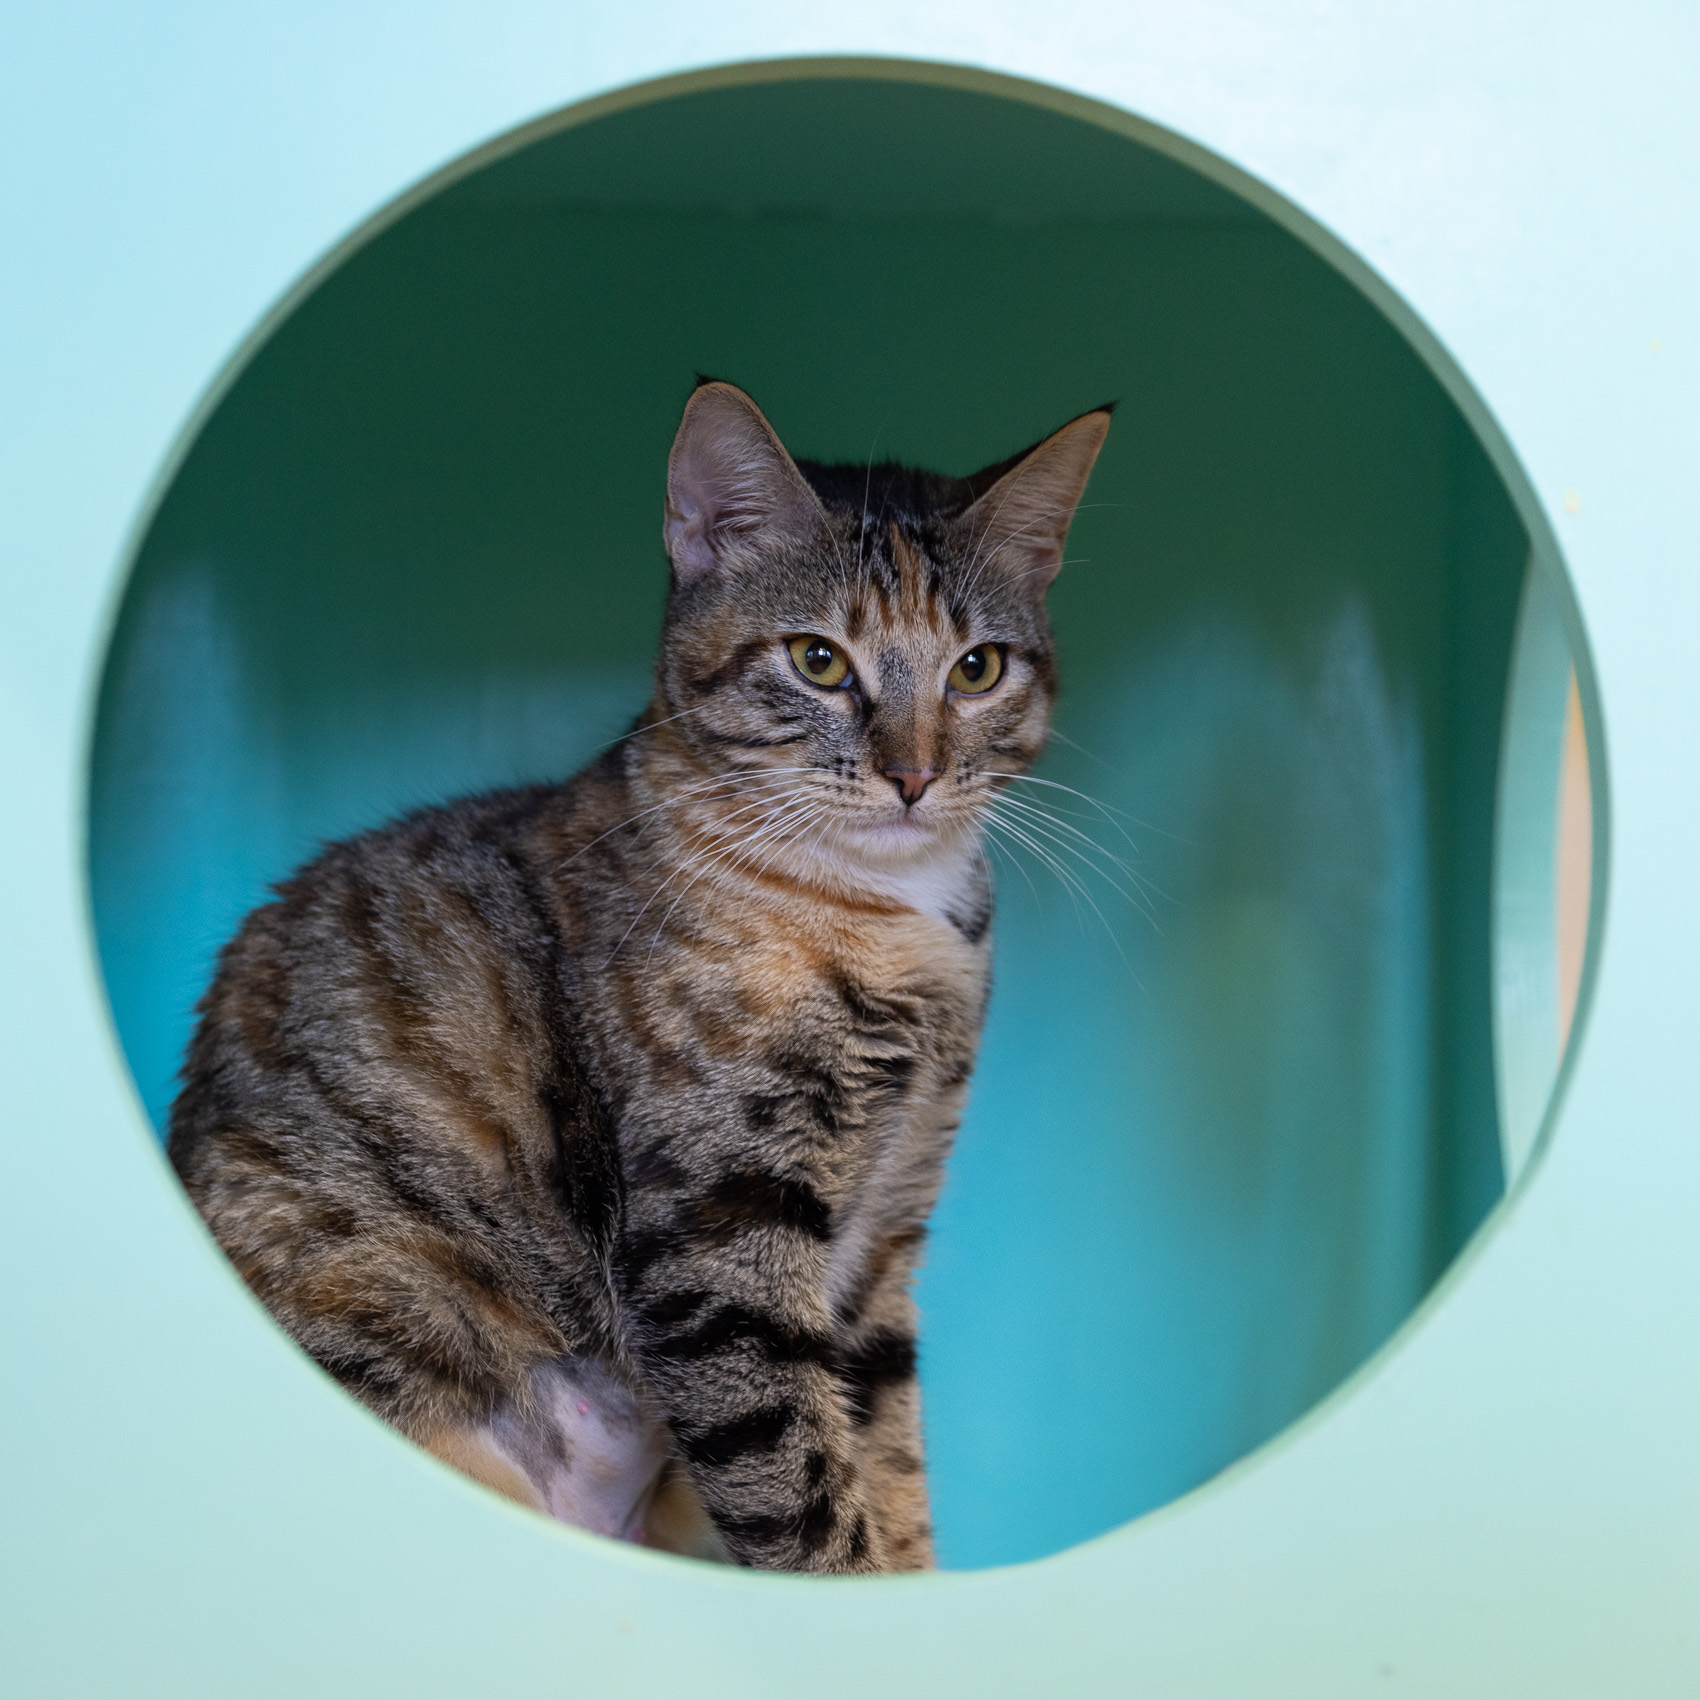 silver-tabby-cat-sitting-in-blue-box-with-round-opening-8519-Edit